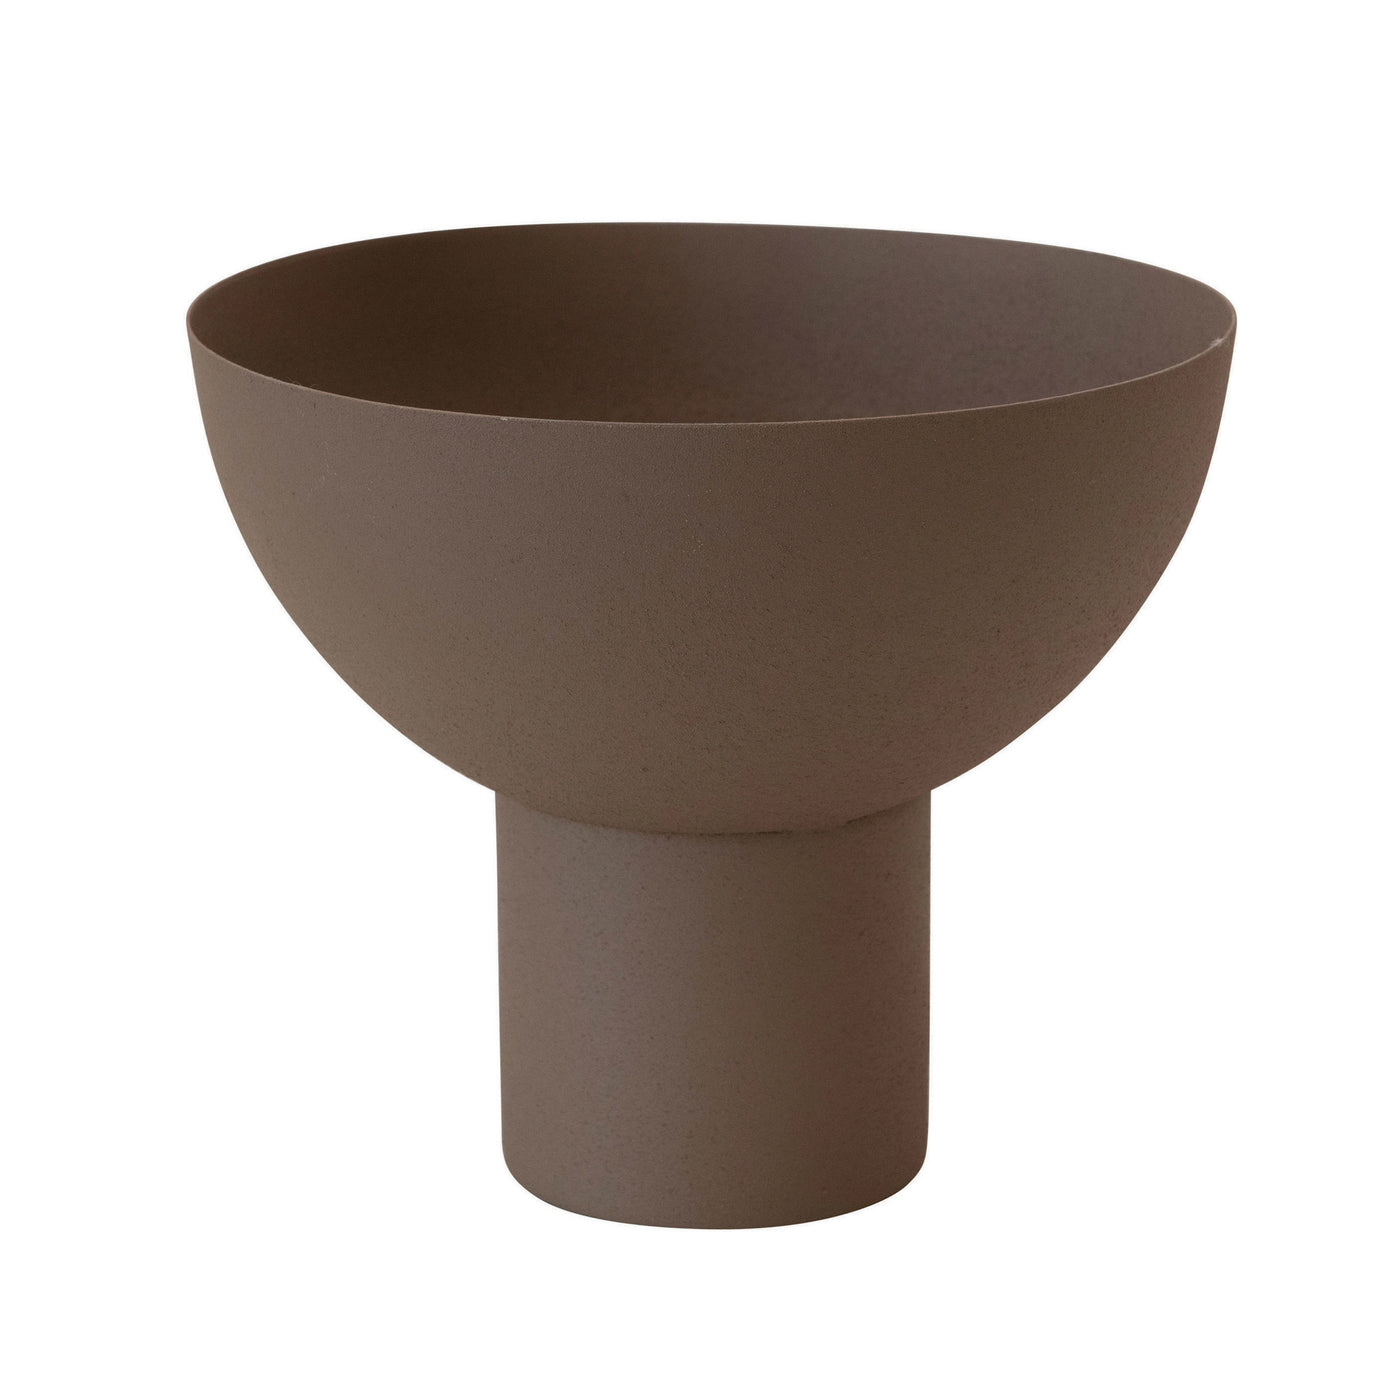 Matte Taupe Decorative Metal Footed Bowl